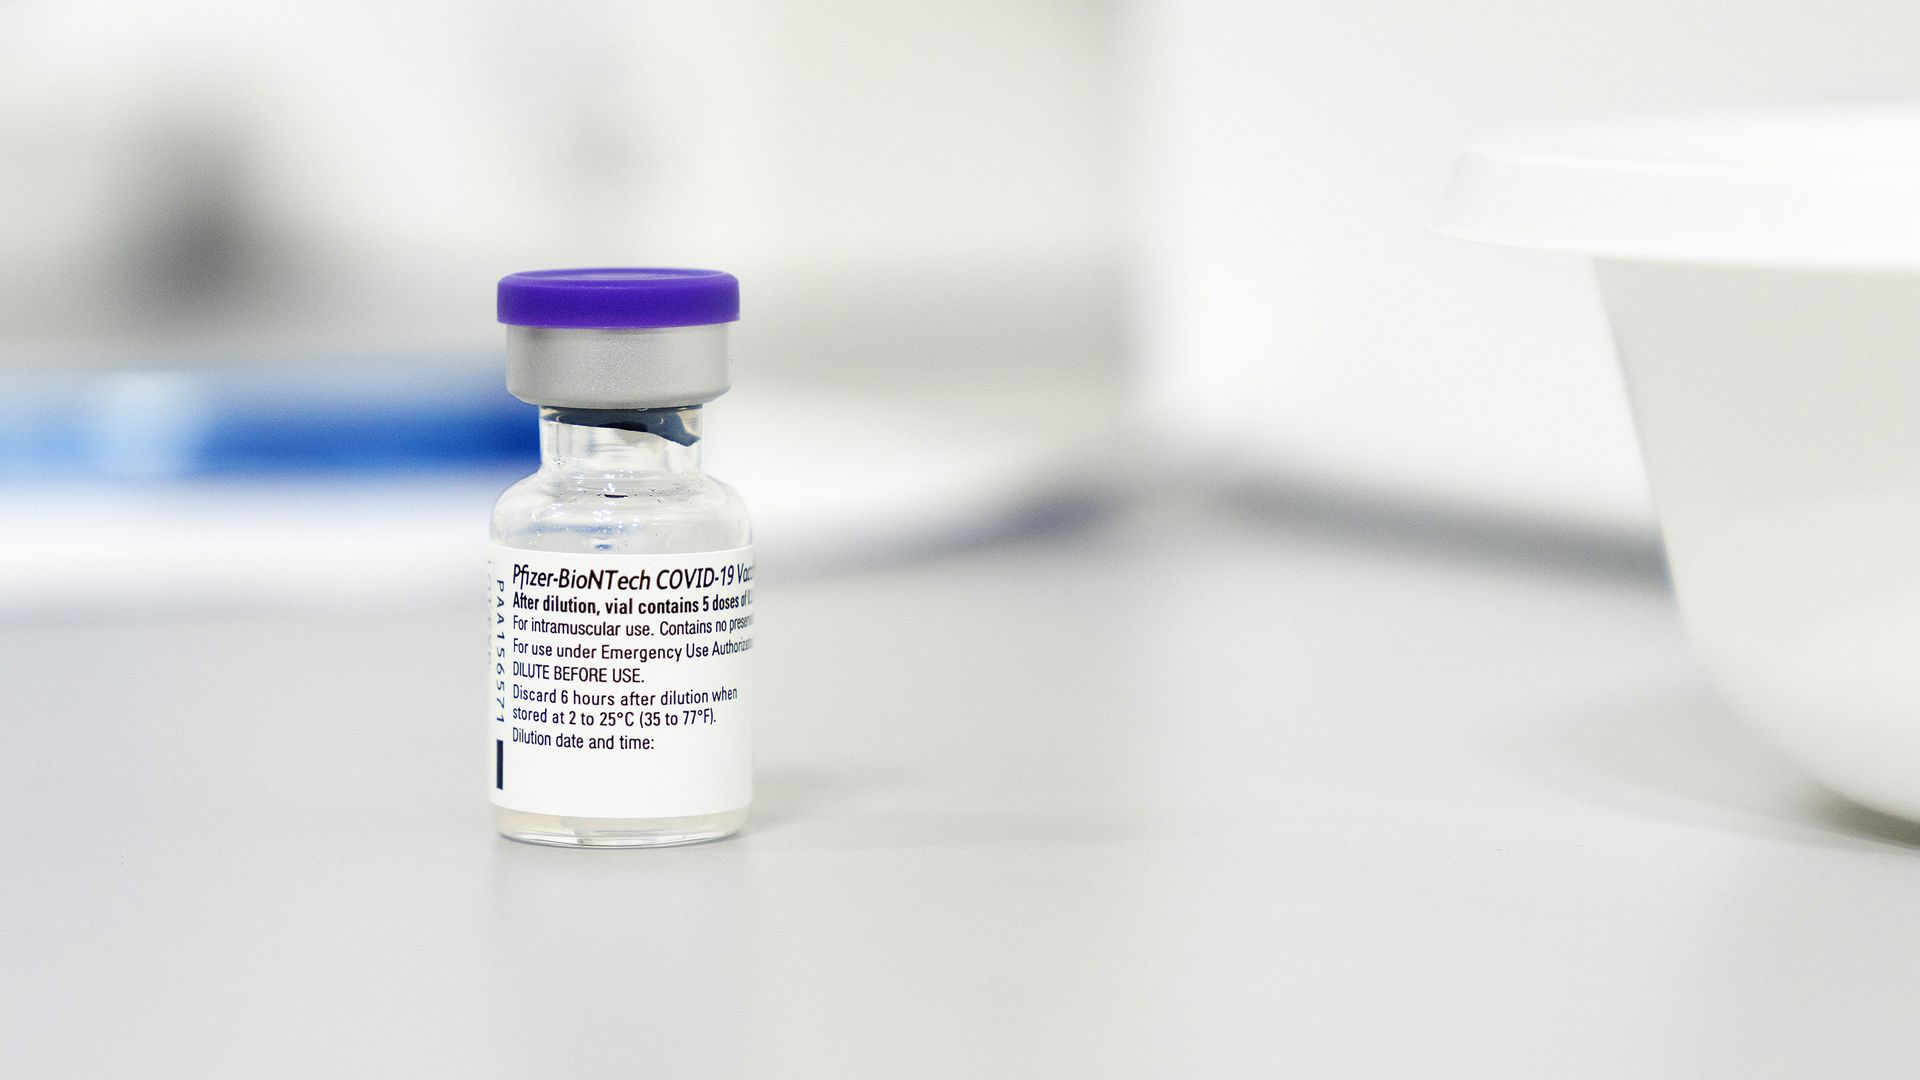 Picture of a vial of the Pfizer-BioNTech coronavirus vaccine